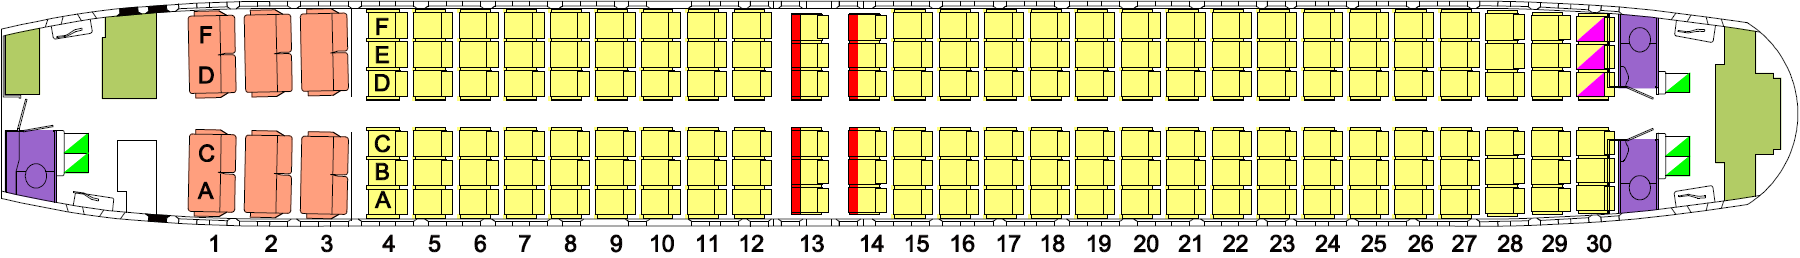 Qantas' Boeing 737 Business seat map, with Business at the front of the cabin.